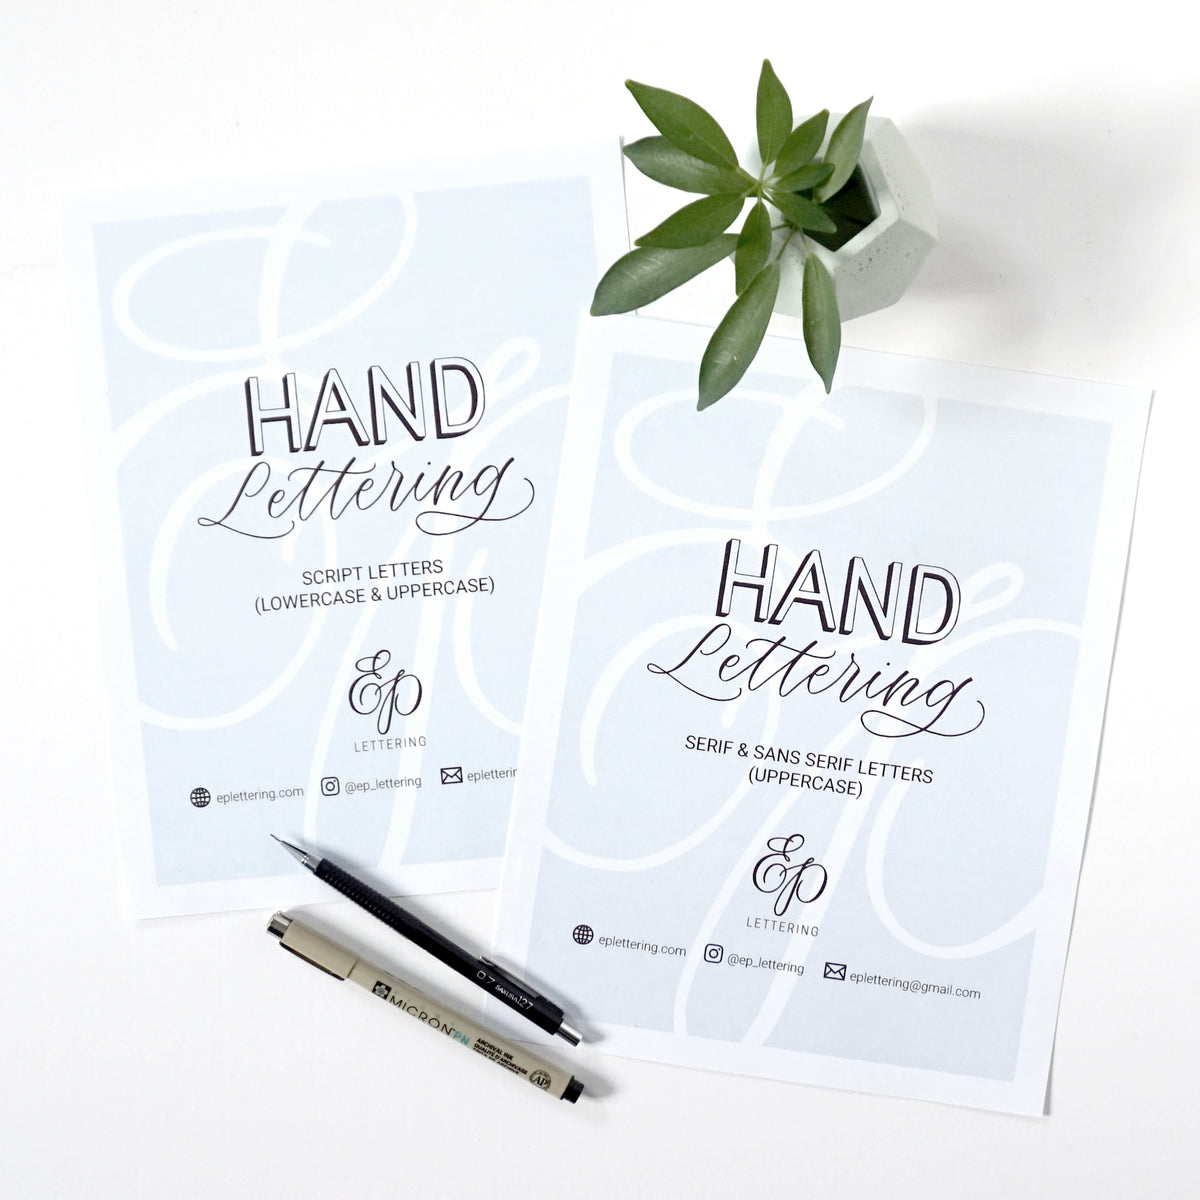 Erica Pinto Hand Lettering - Hand Lettering Bundle (2 PDFs) - Includes &#39;Hand Lettering - Script Letters&#39; + &#39;Hand Lettering - Serif &amp; Sans Serif Letters&#39;